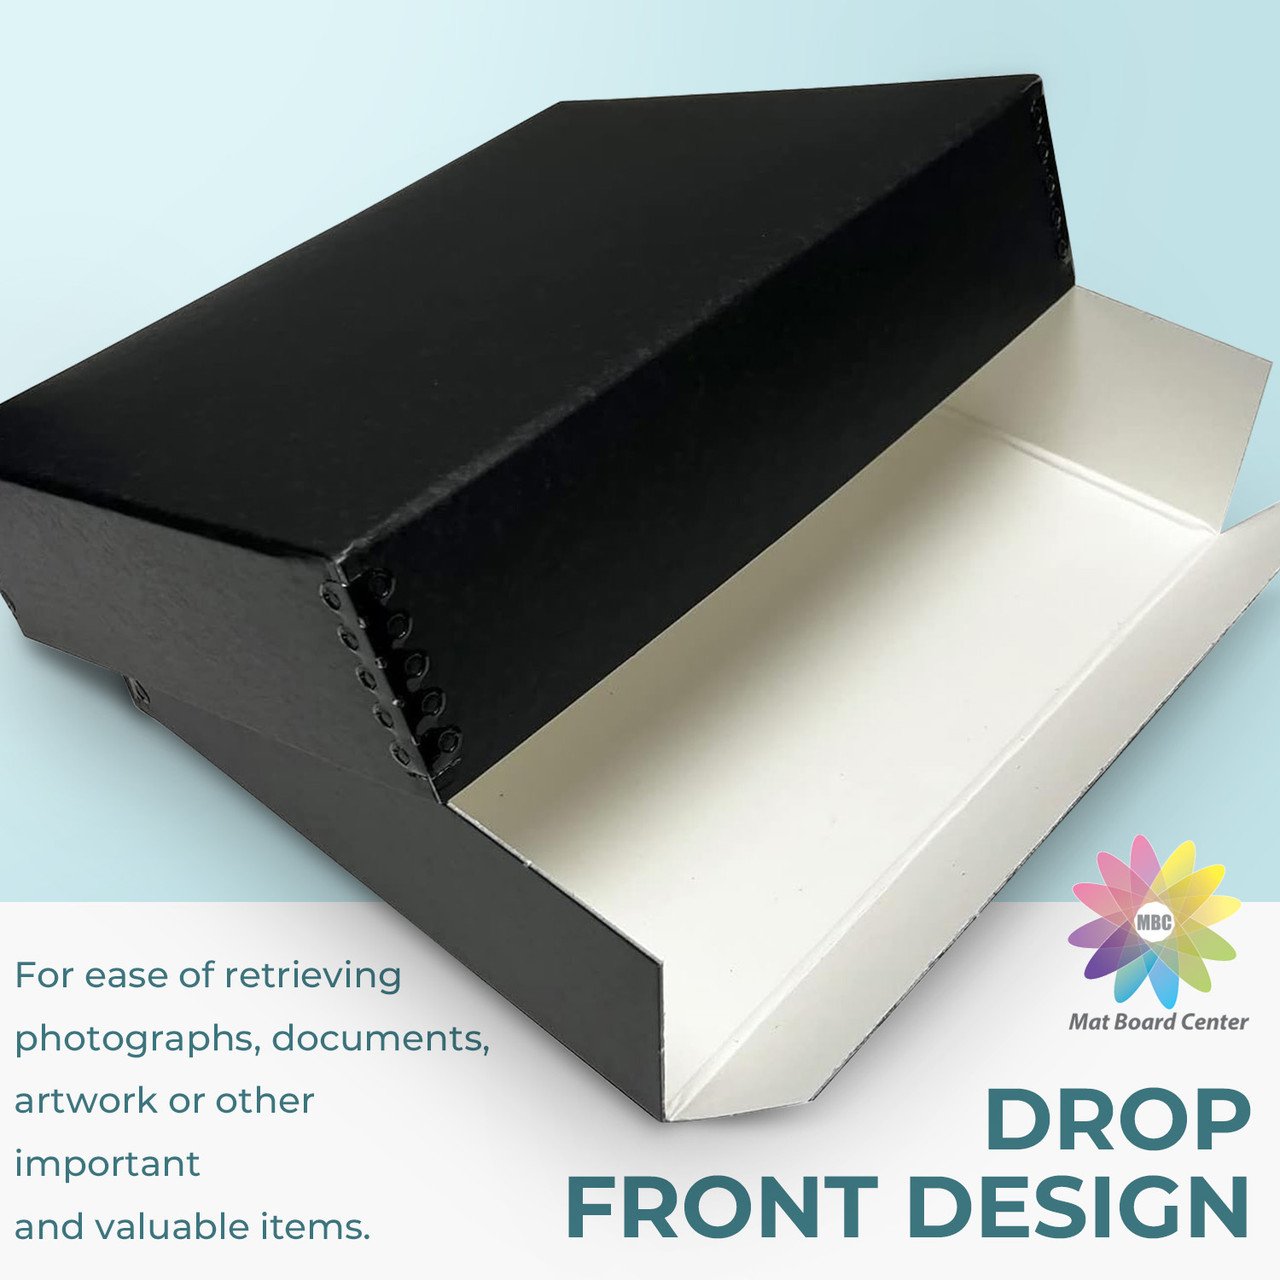 Mat Board Center, Archival Folio Storage Box 11x14, Clamshell Design with  Metal Edge, Protect And Store